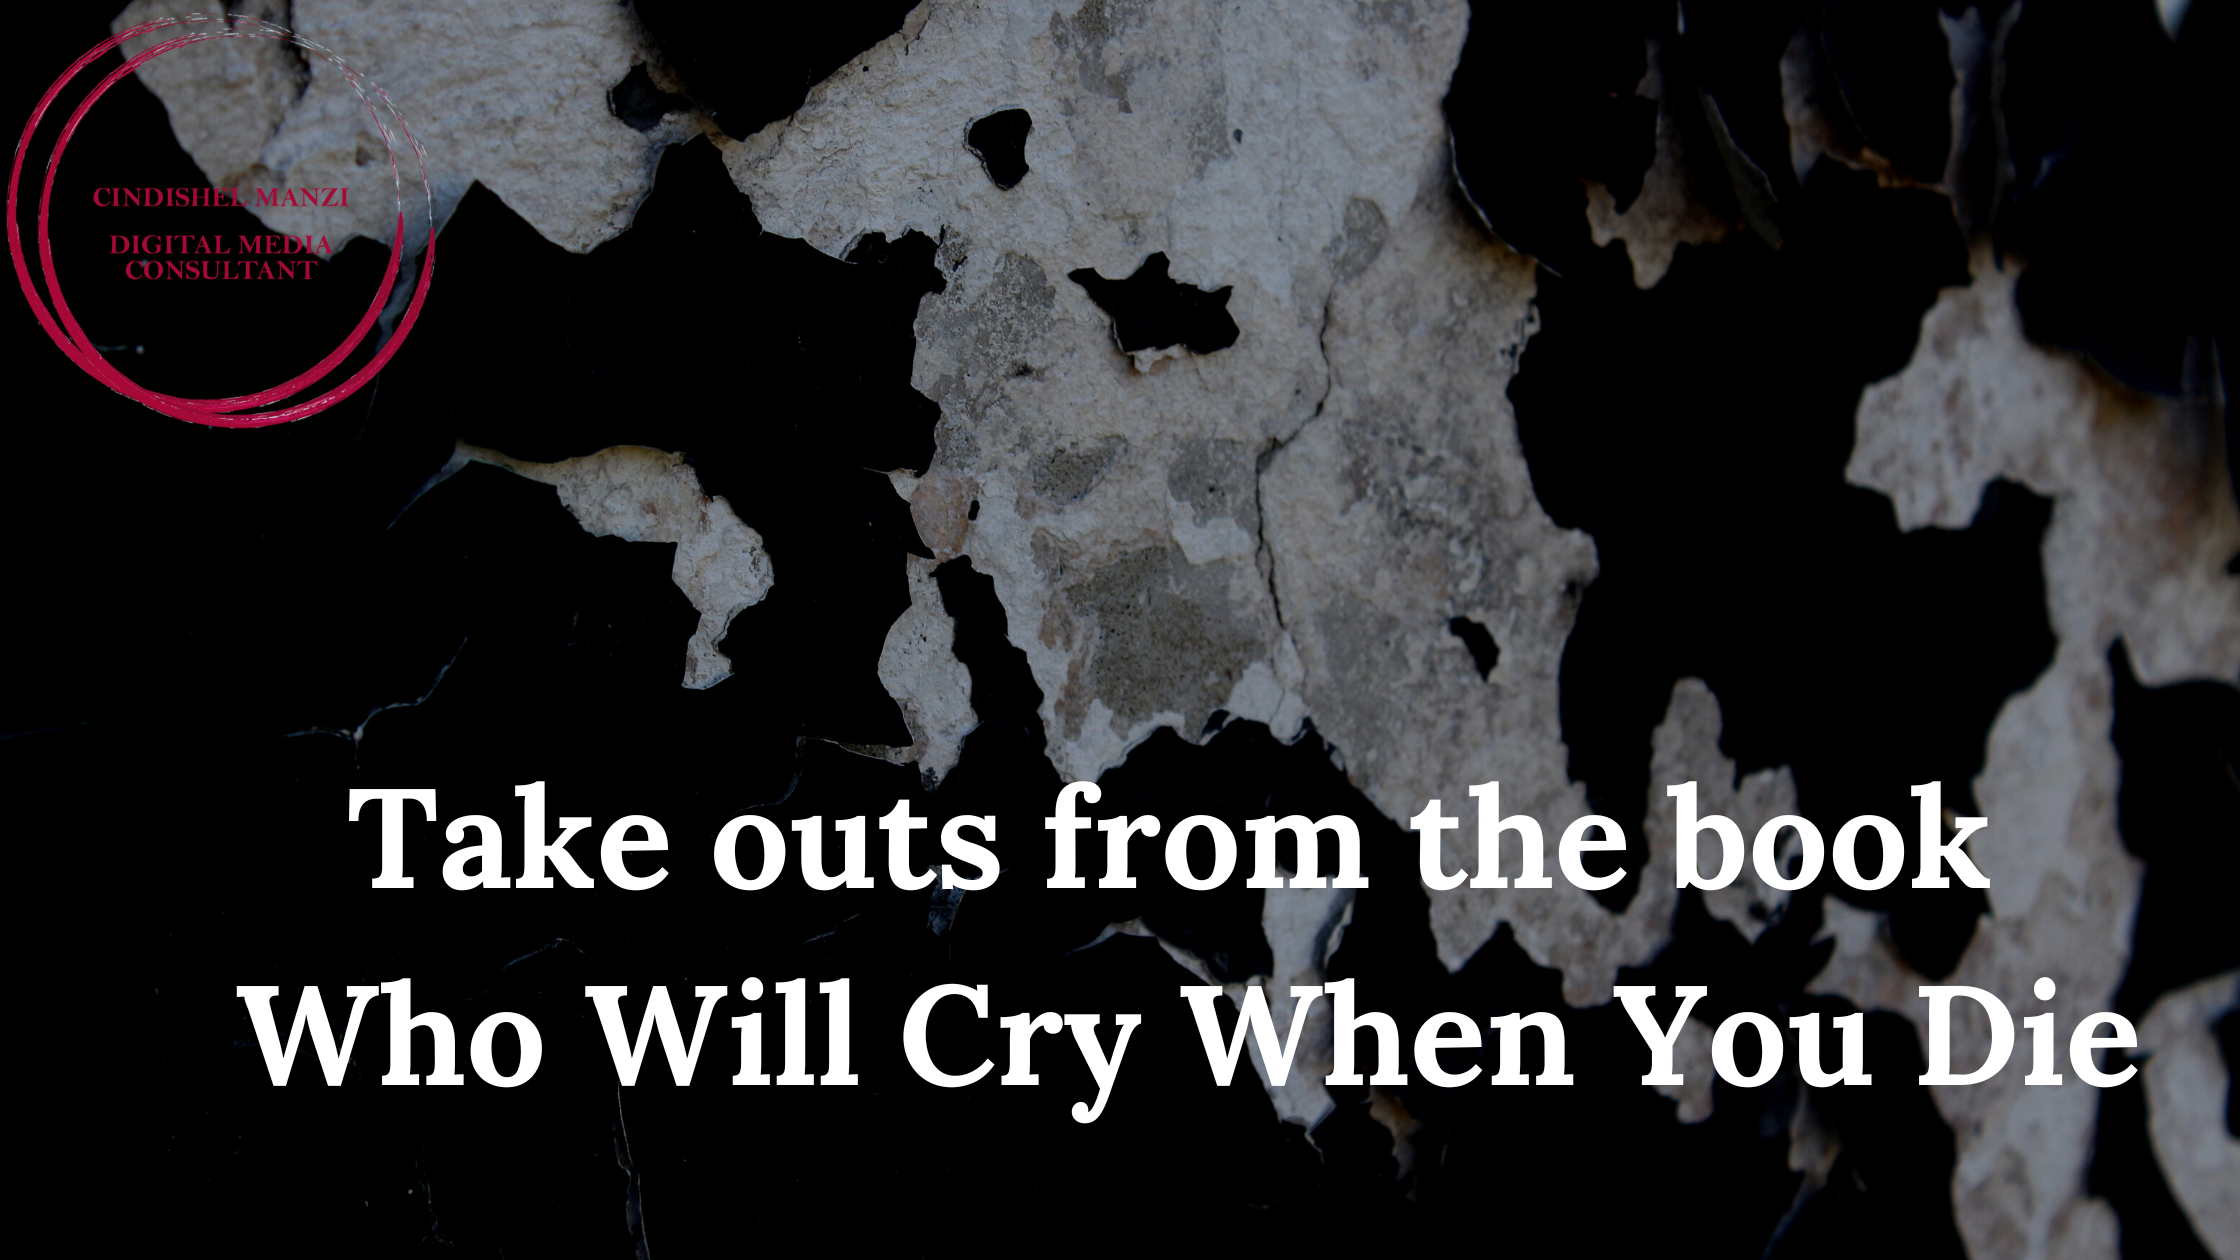 Who Will Cry When You Die, Robin sharma, Cindishel Manzi, virtual assistant